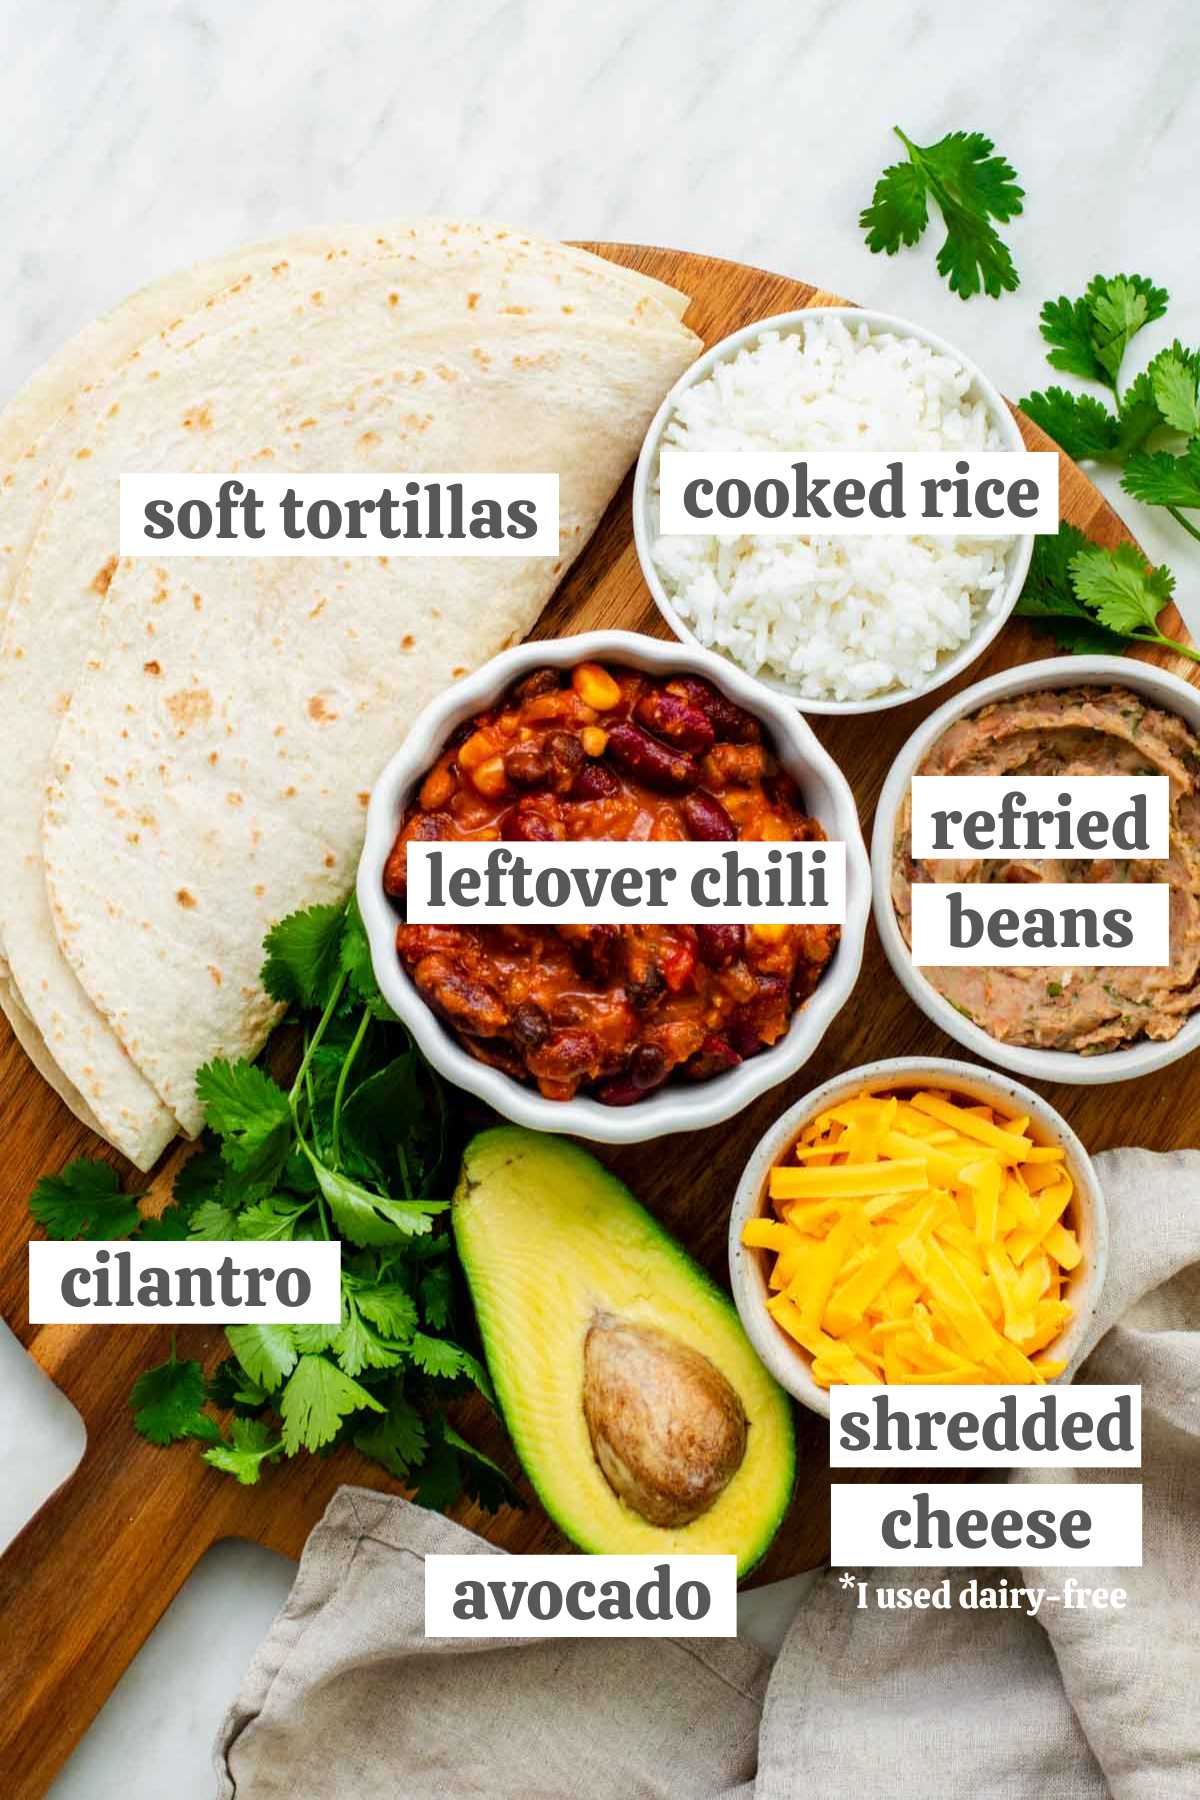 Ingredients for these chili burritos, labeled.